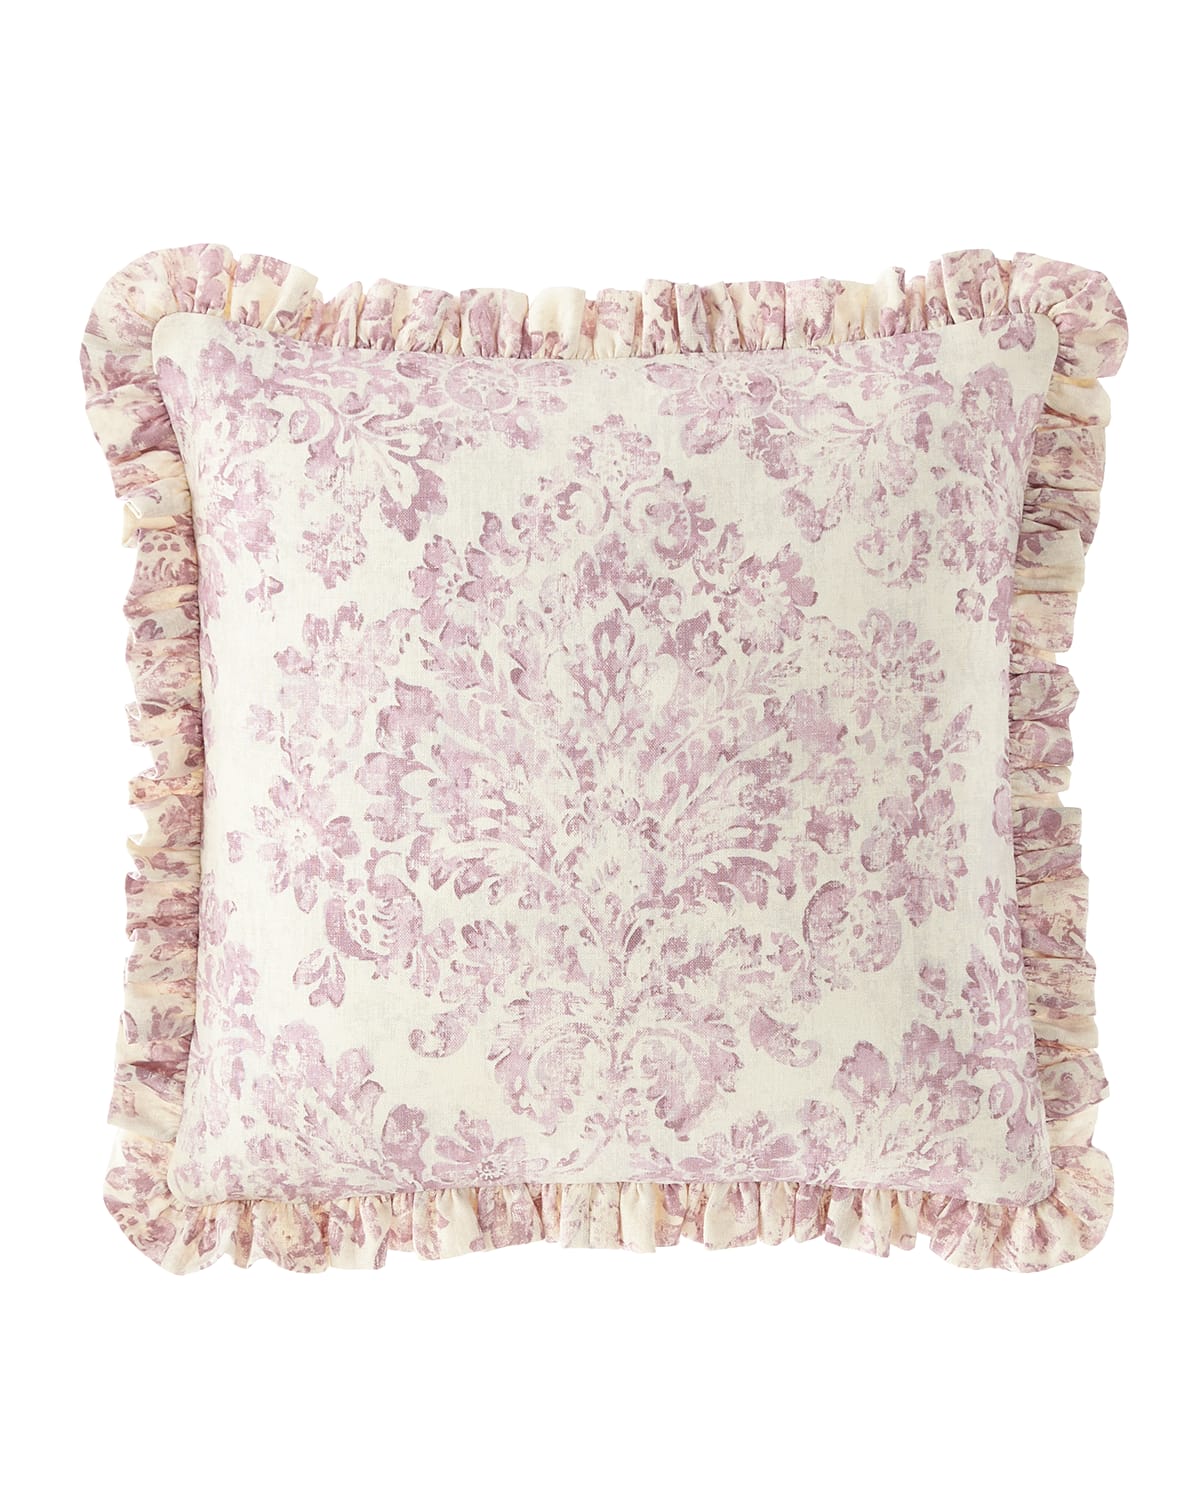 Image Sweet Dreams Iris Damask Boutique Pillow with Ruffle Edge